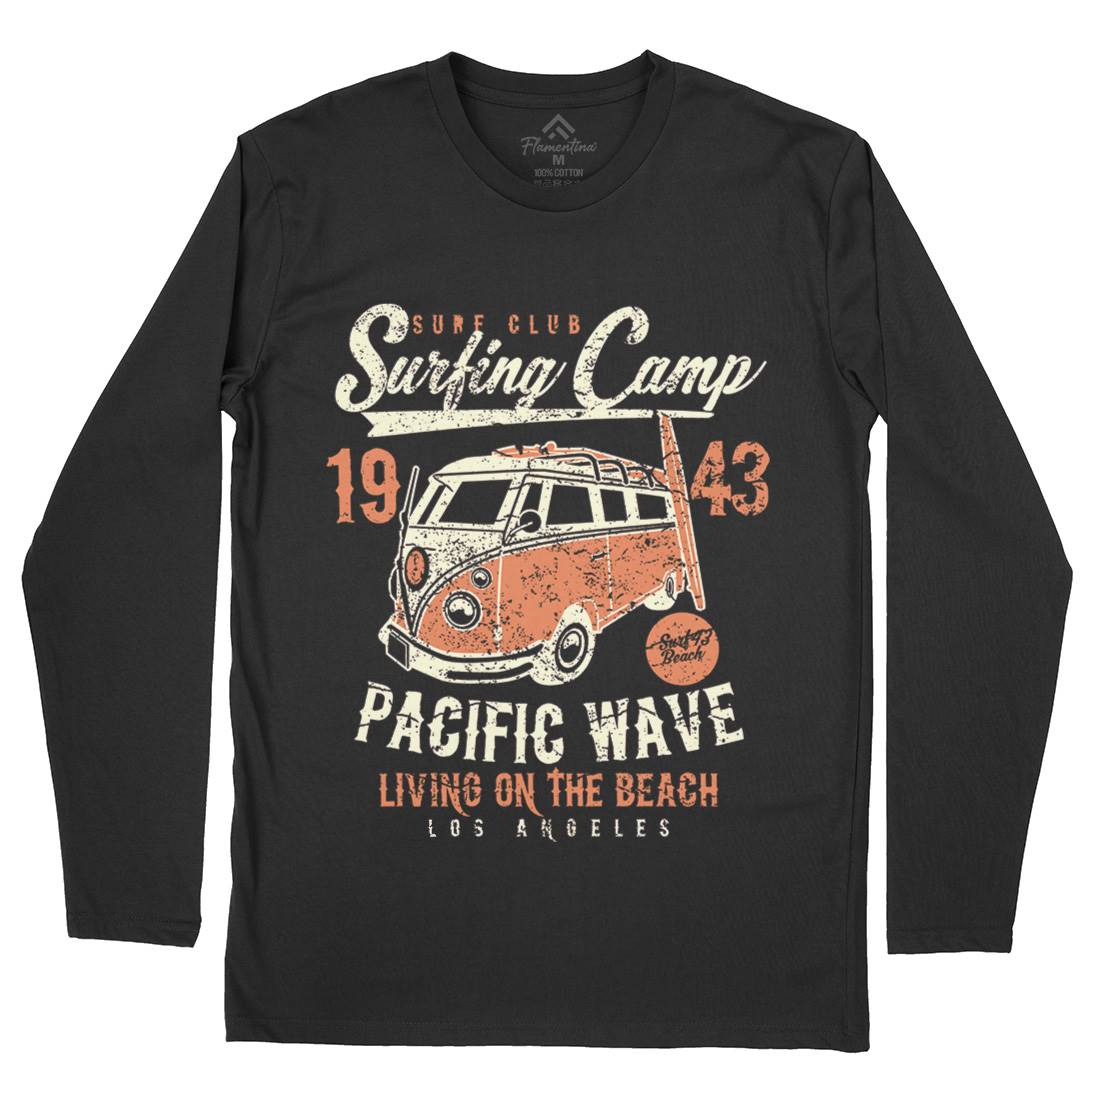 Surfing Camp Mens Long Sleeve T-Shirt Surf A170